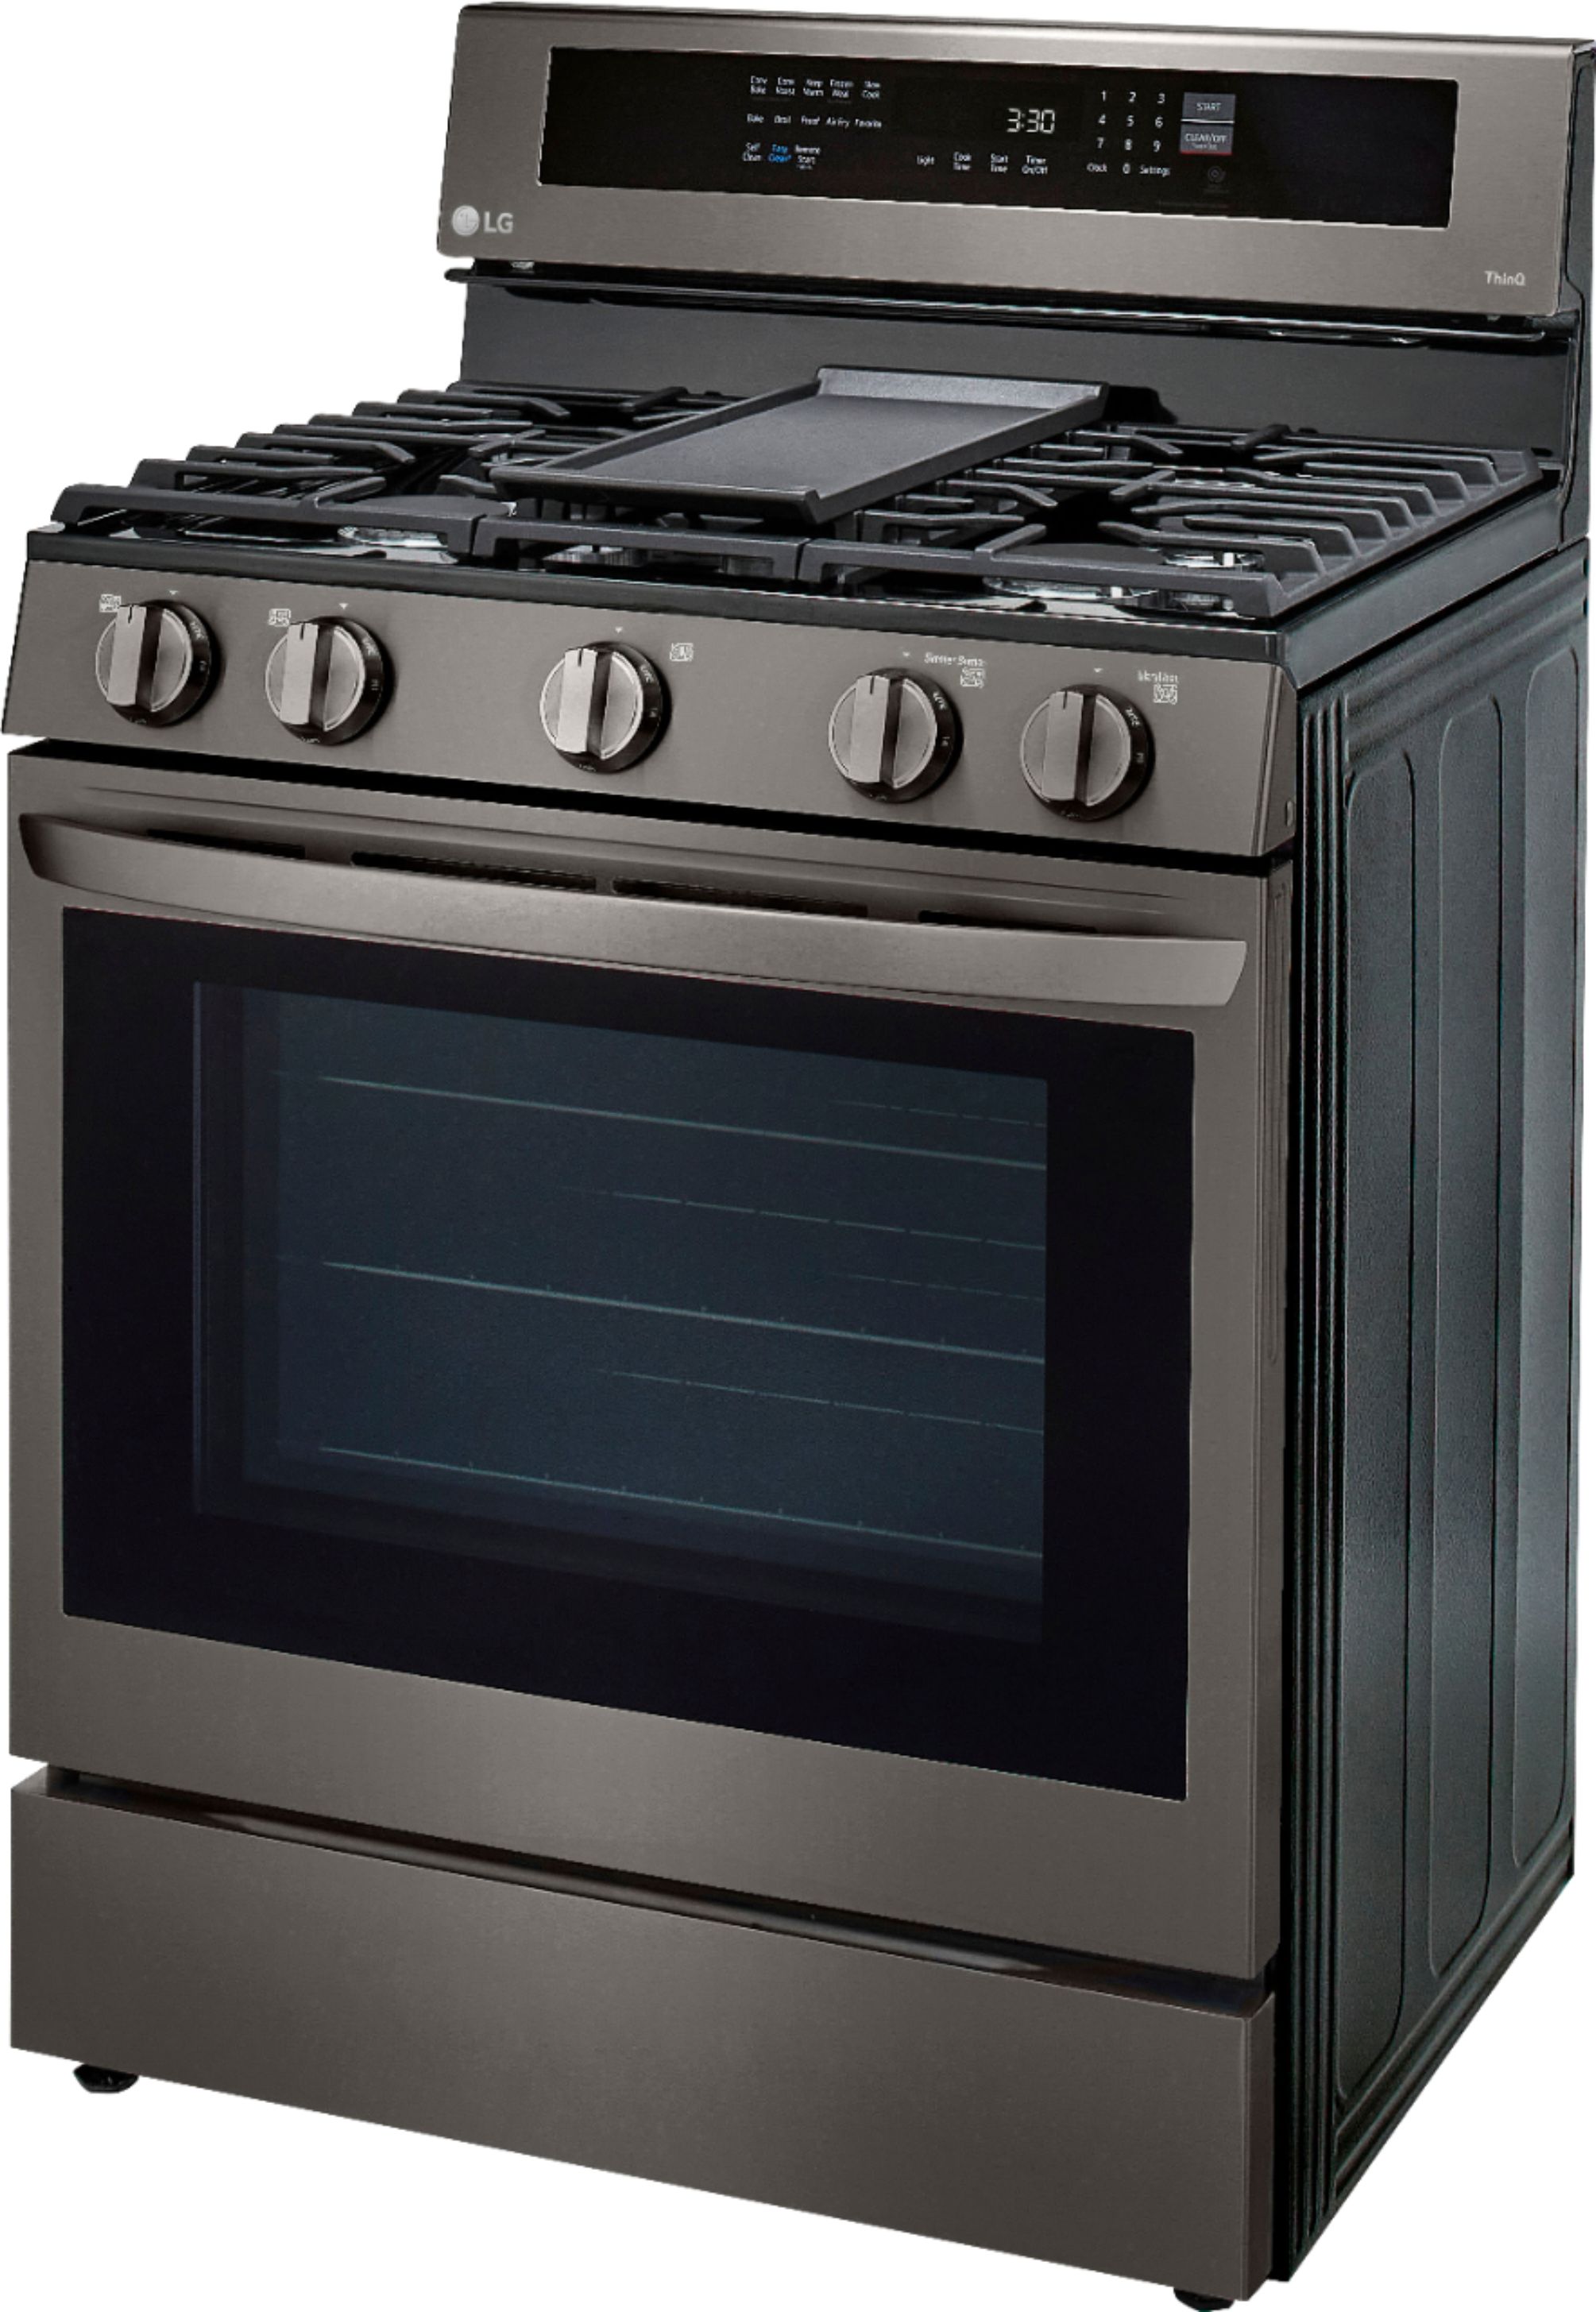 Angle View: LG - 5.8 Cu. Ft. Freestanding Gas True Convection Range with EasyClean, InstaView and AirFry - Black stainless steel